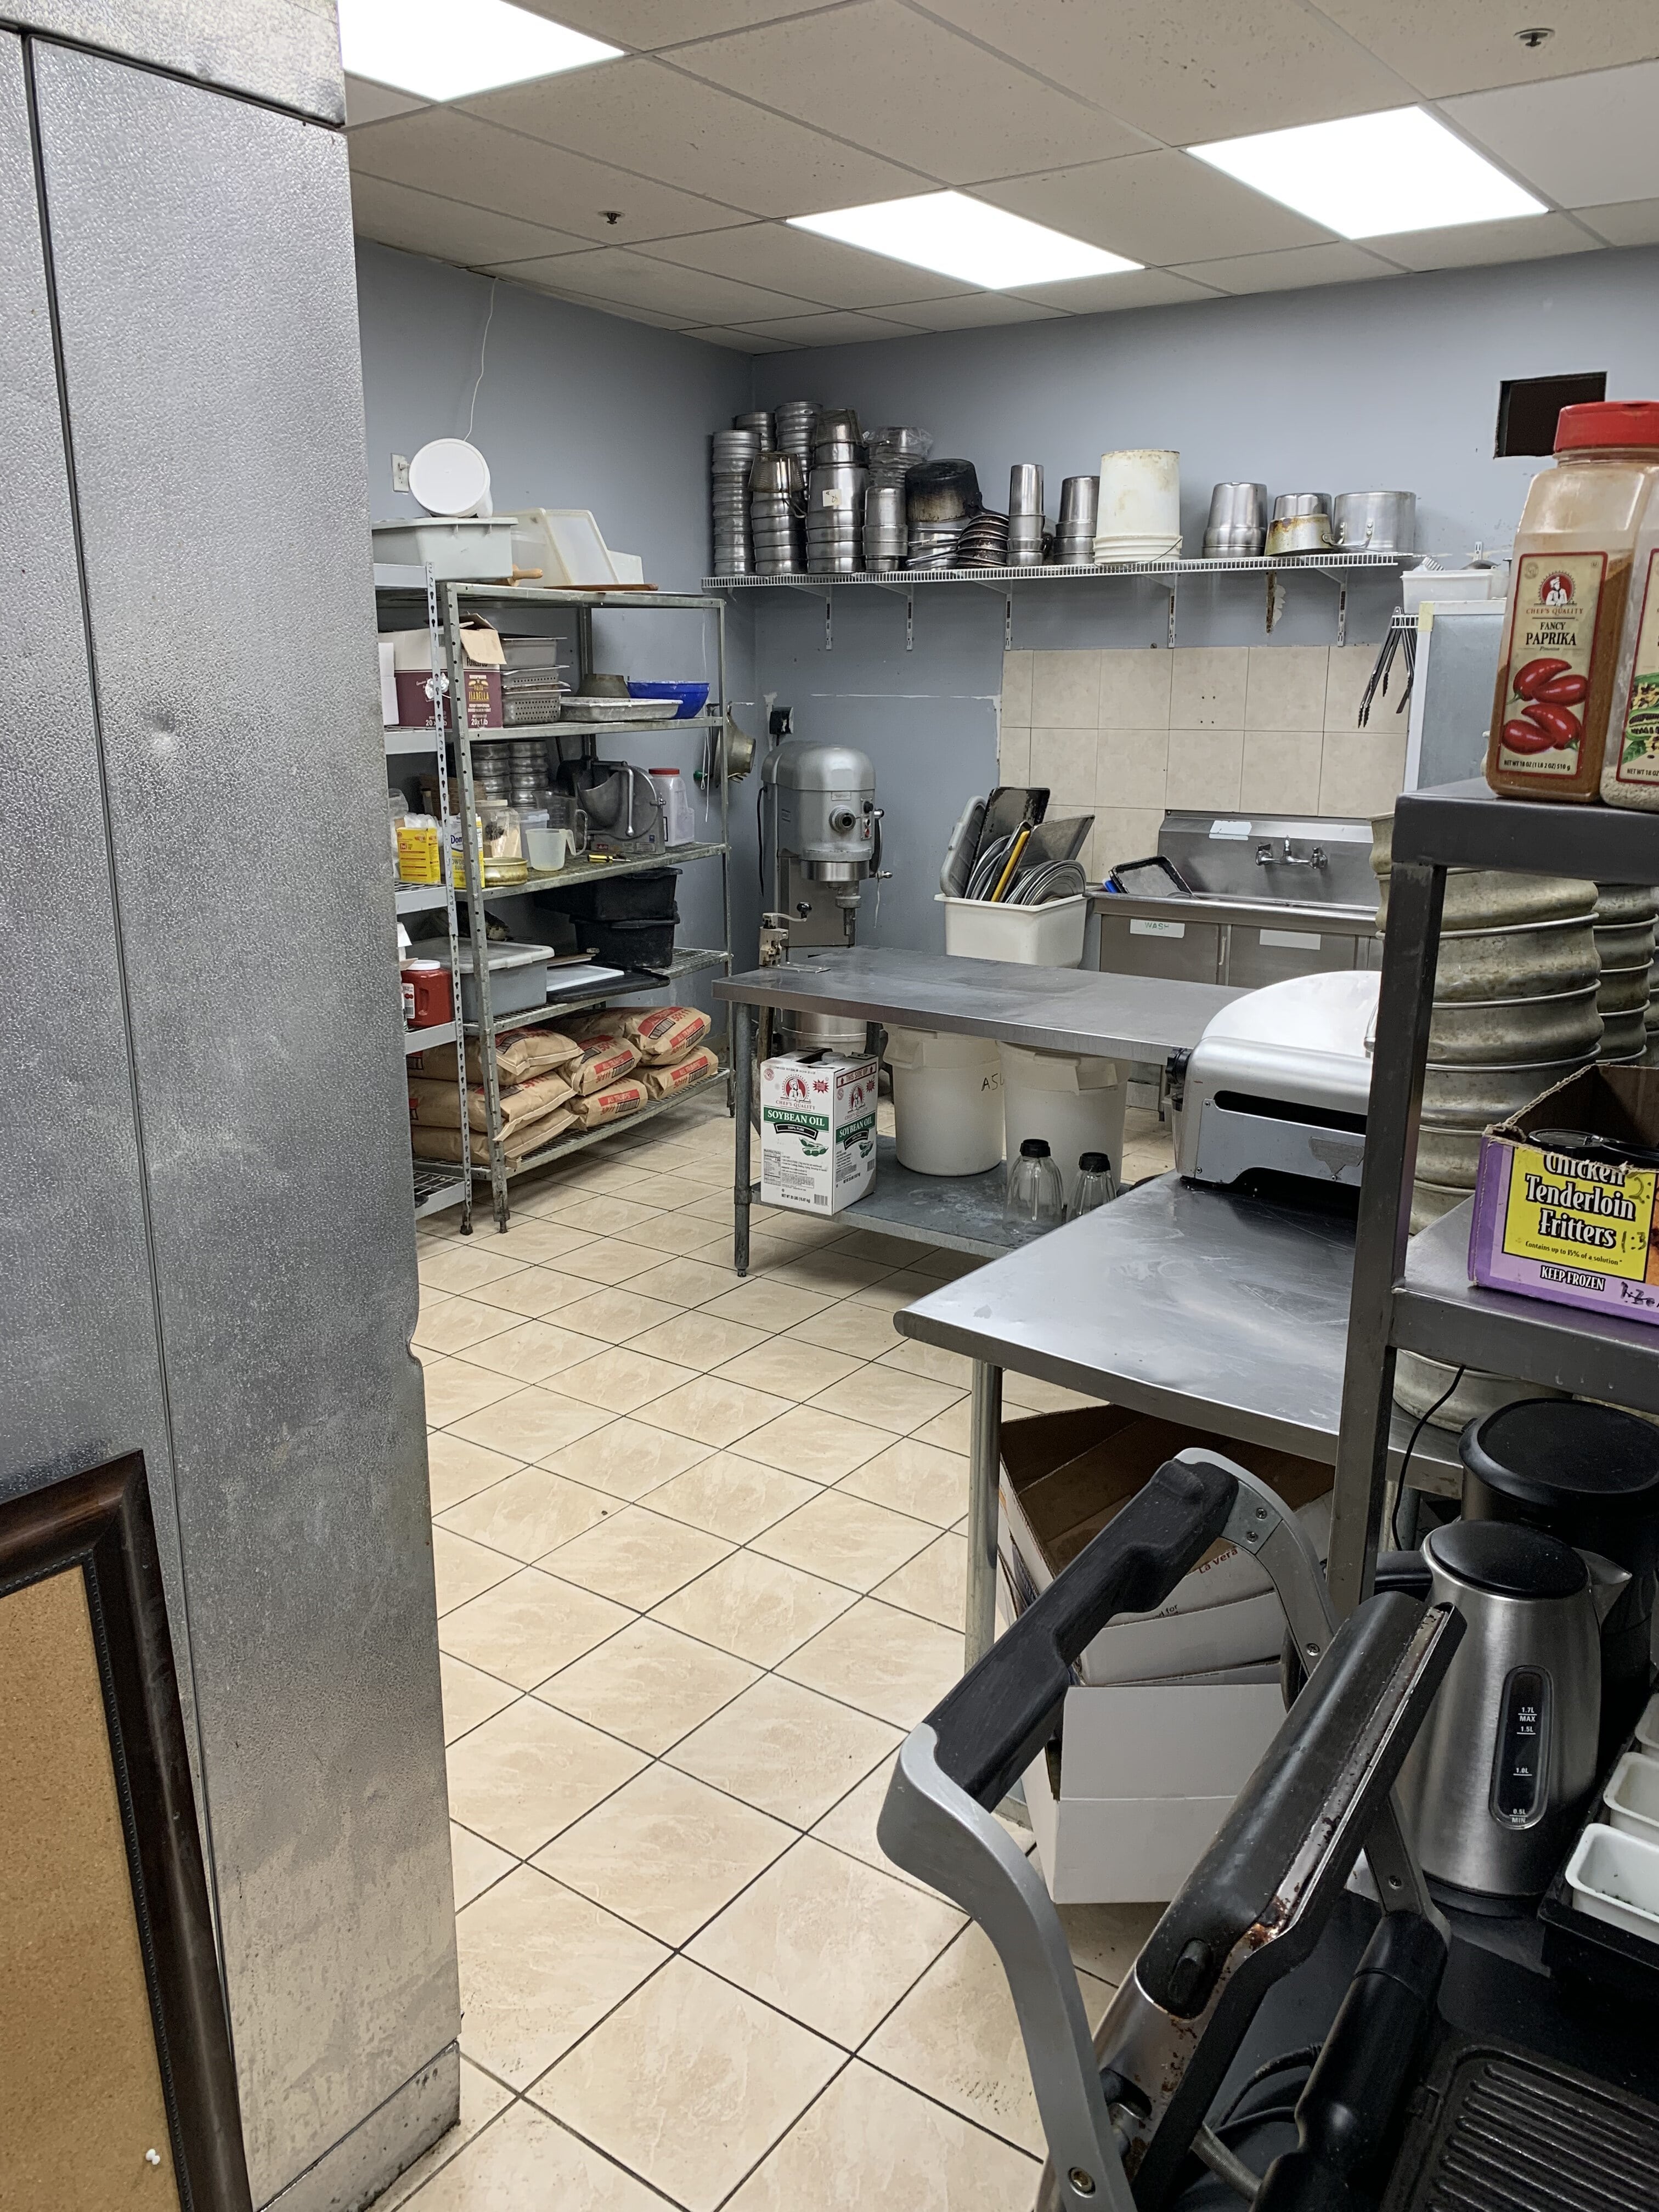 Pizzeria Grill Restaurant Business for Sale in NY